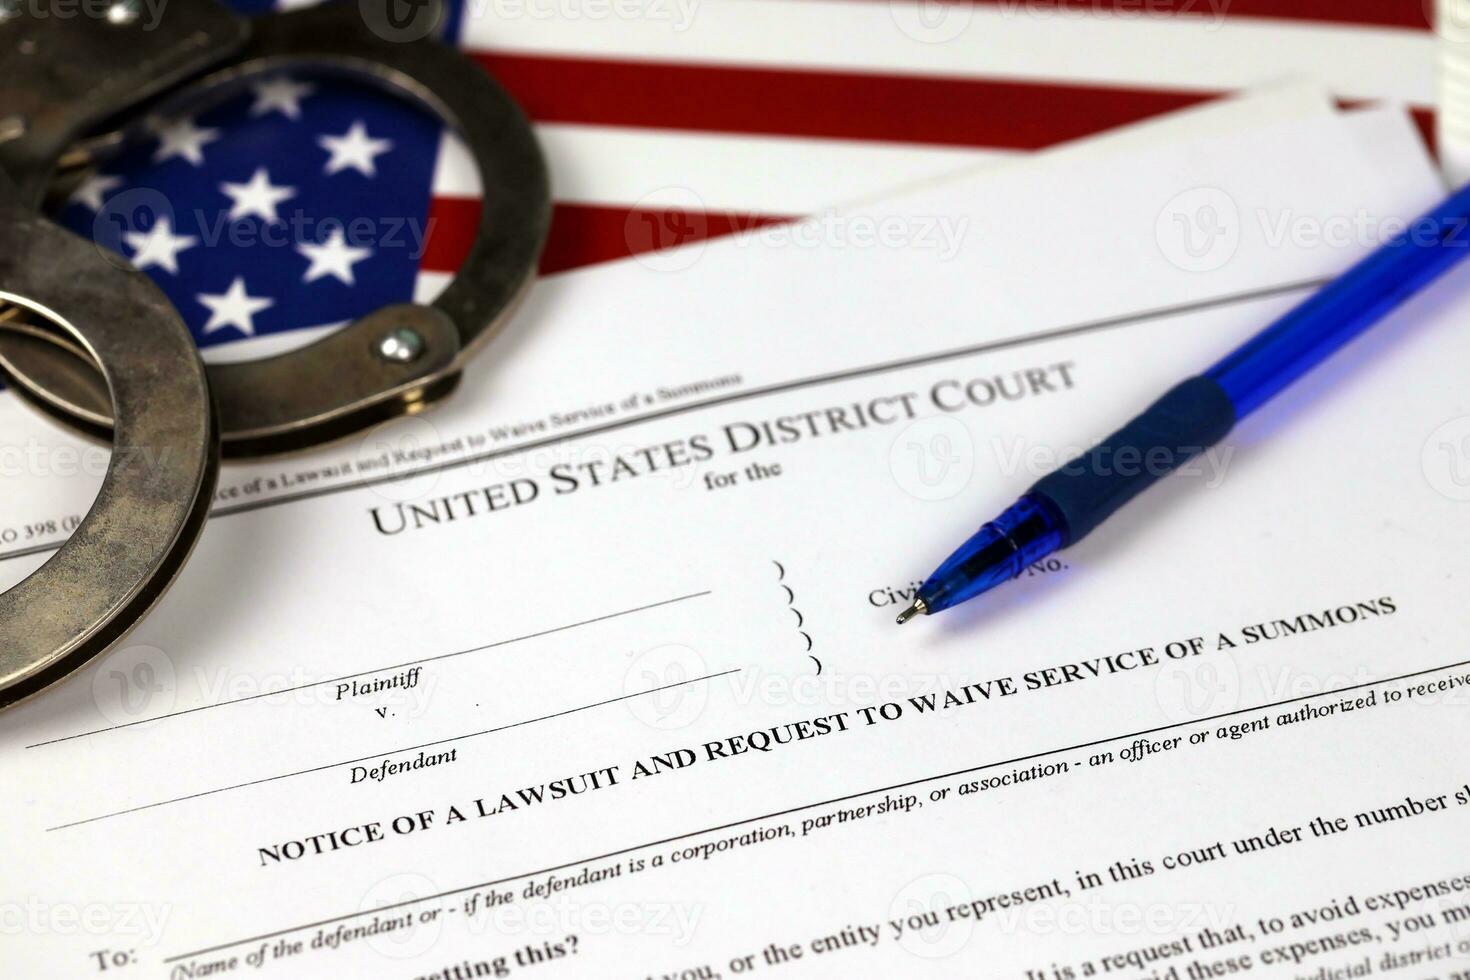 District court Notice of the lawsuit and request to waive service of a summons. Papers with handcuffs and blue pen on United States flag photo